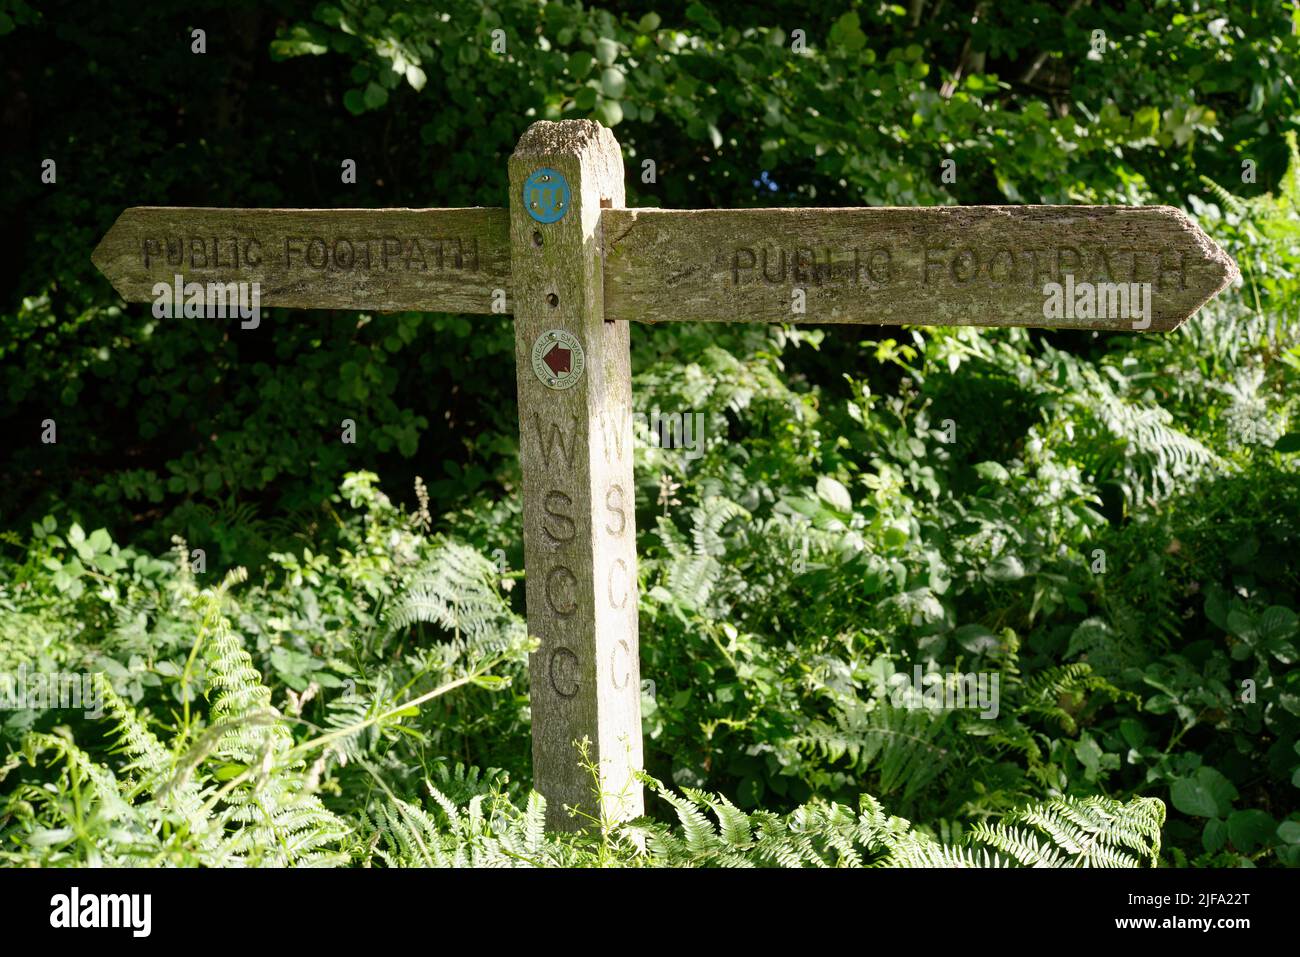 A public footpath path sign in Sussex, England, UK. Stock Photo